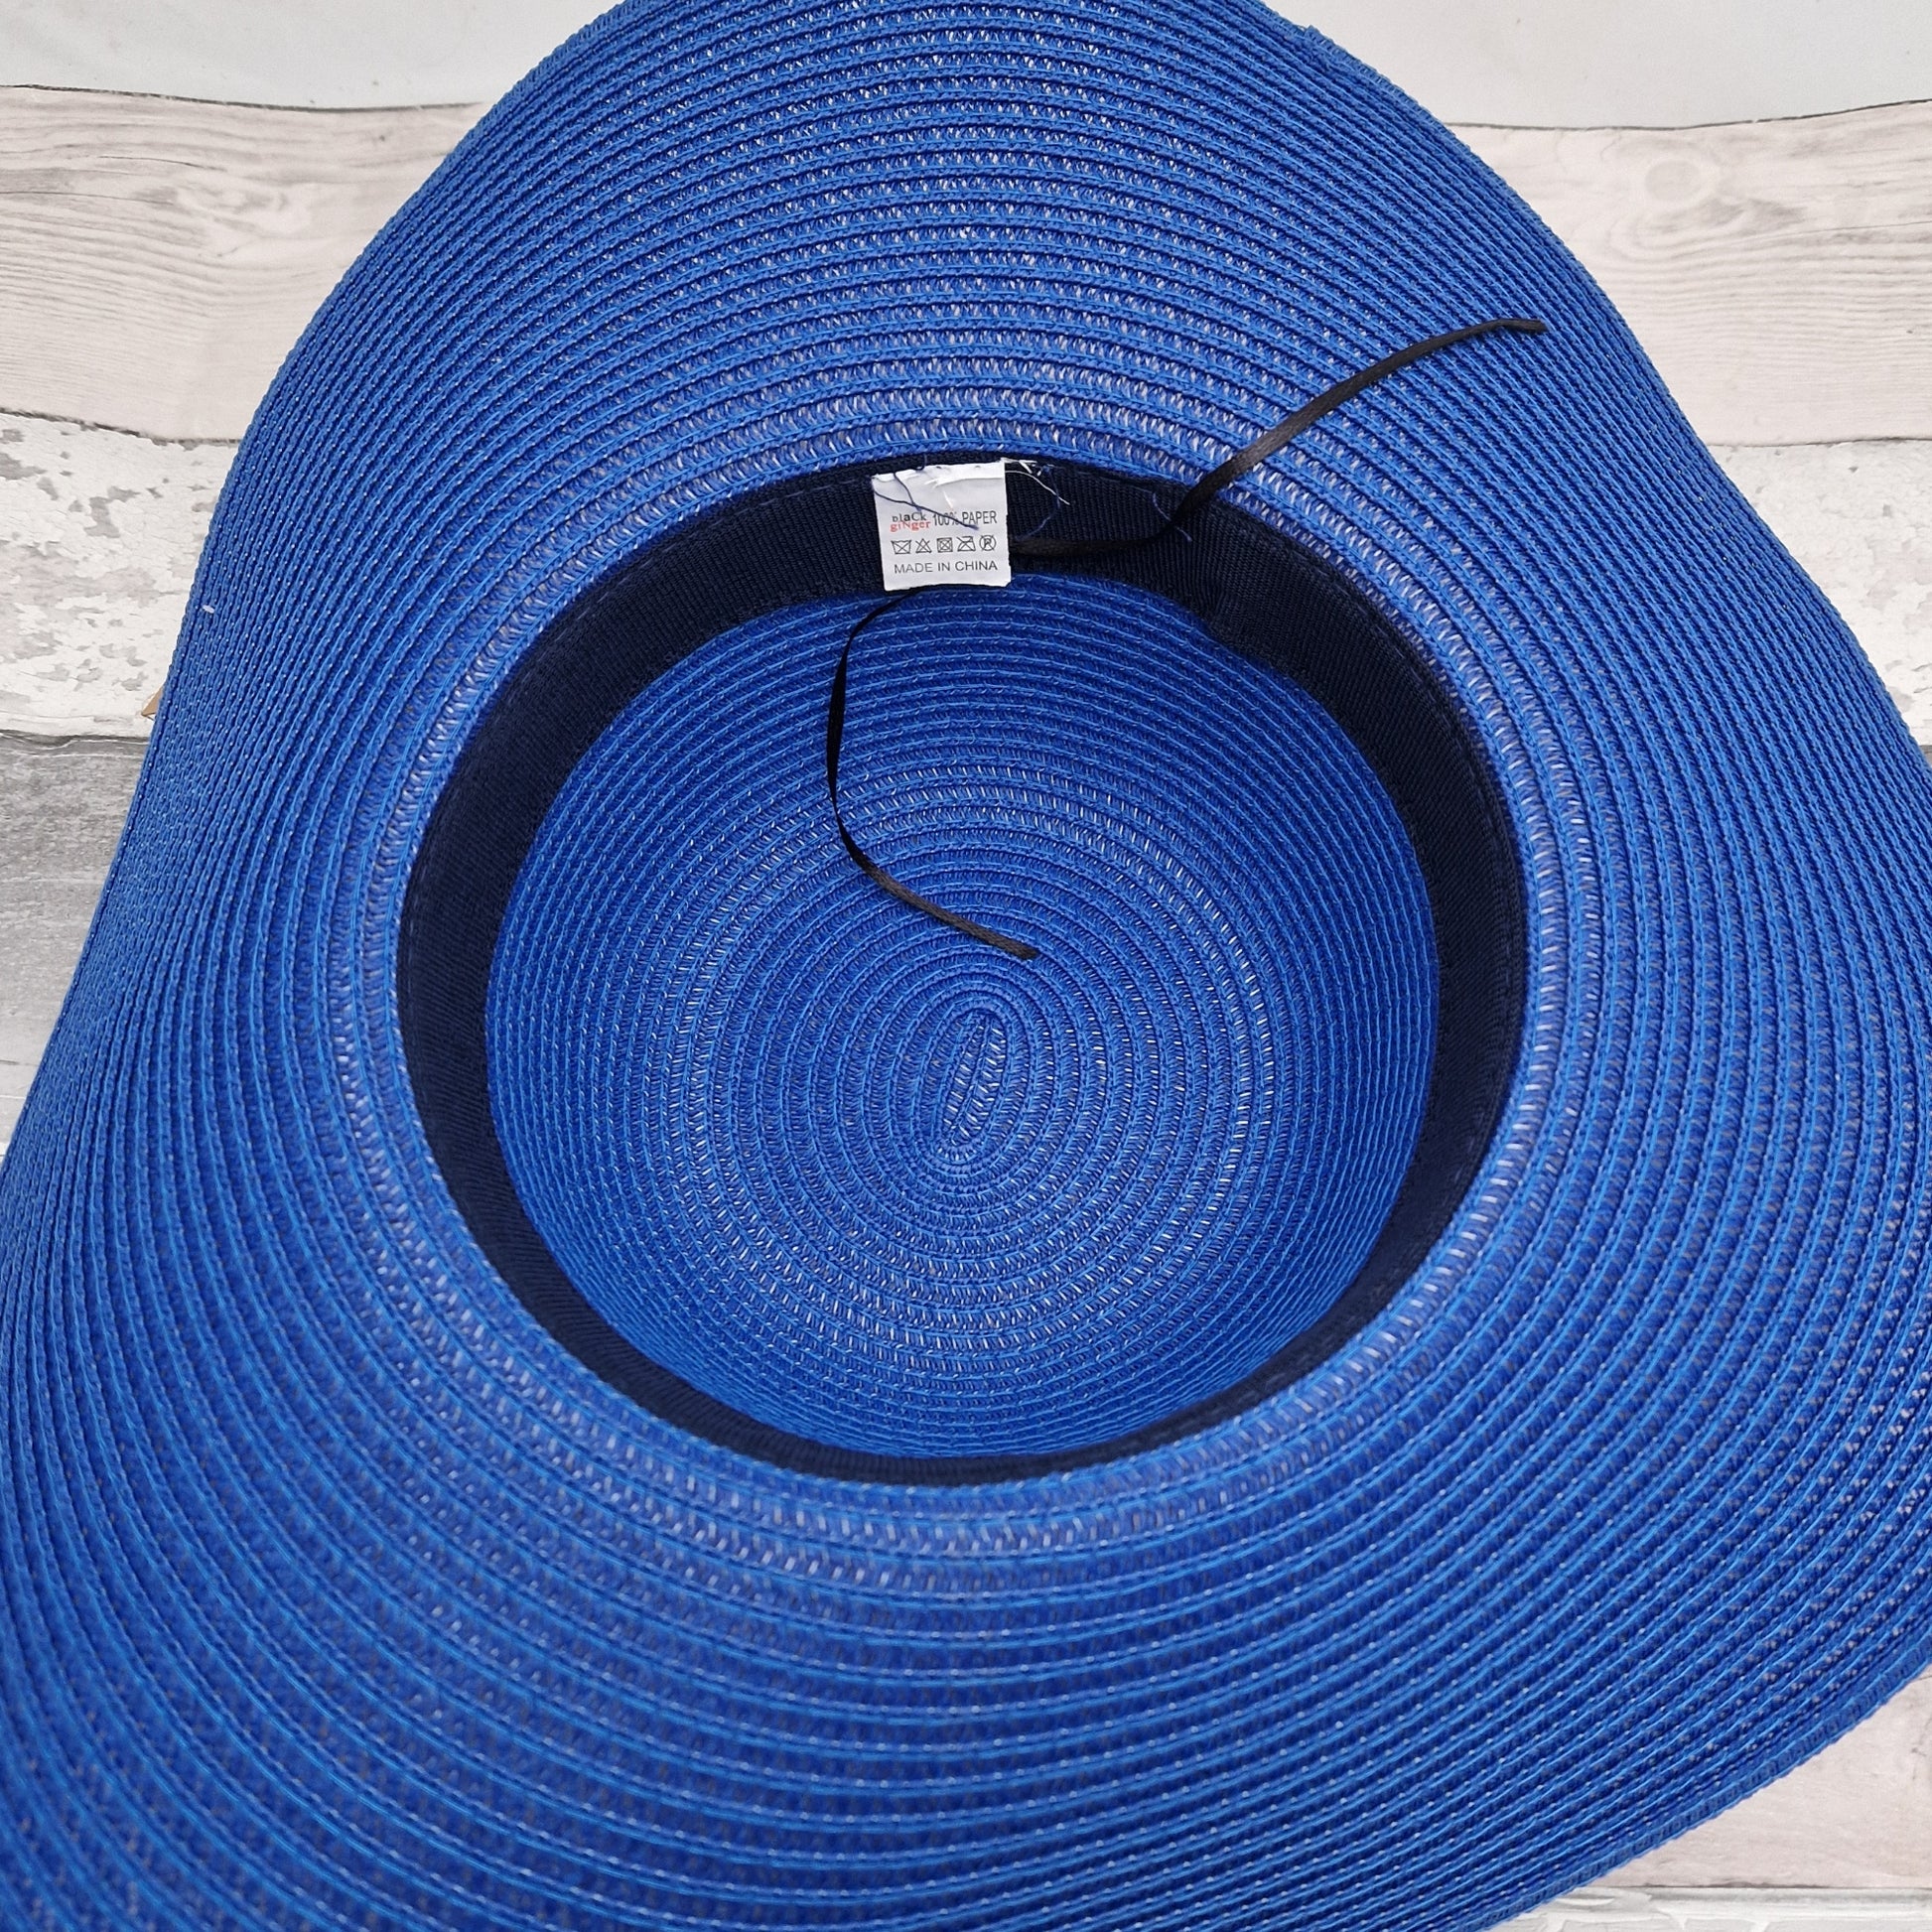 Royal Blue wide brimmed fat with matching coloured belted band.